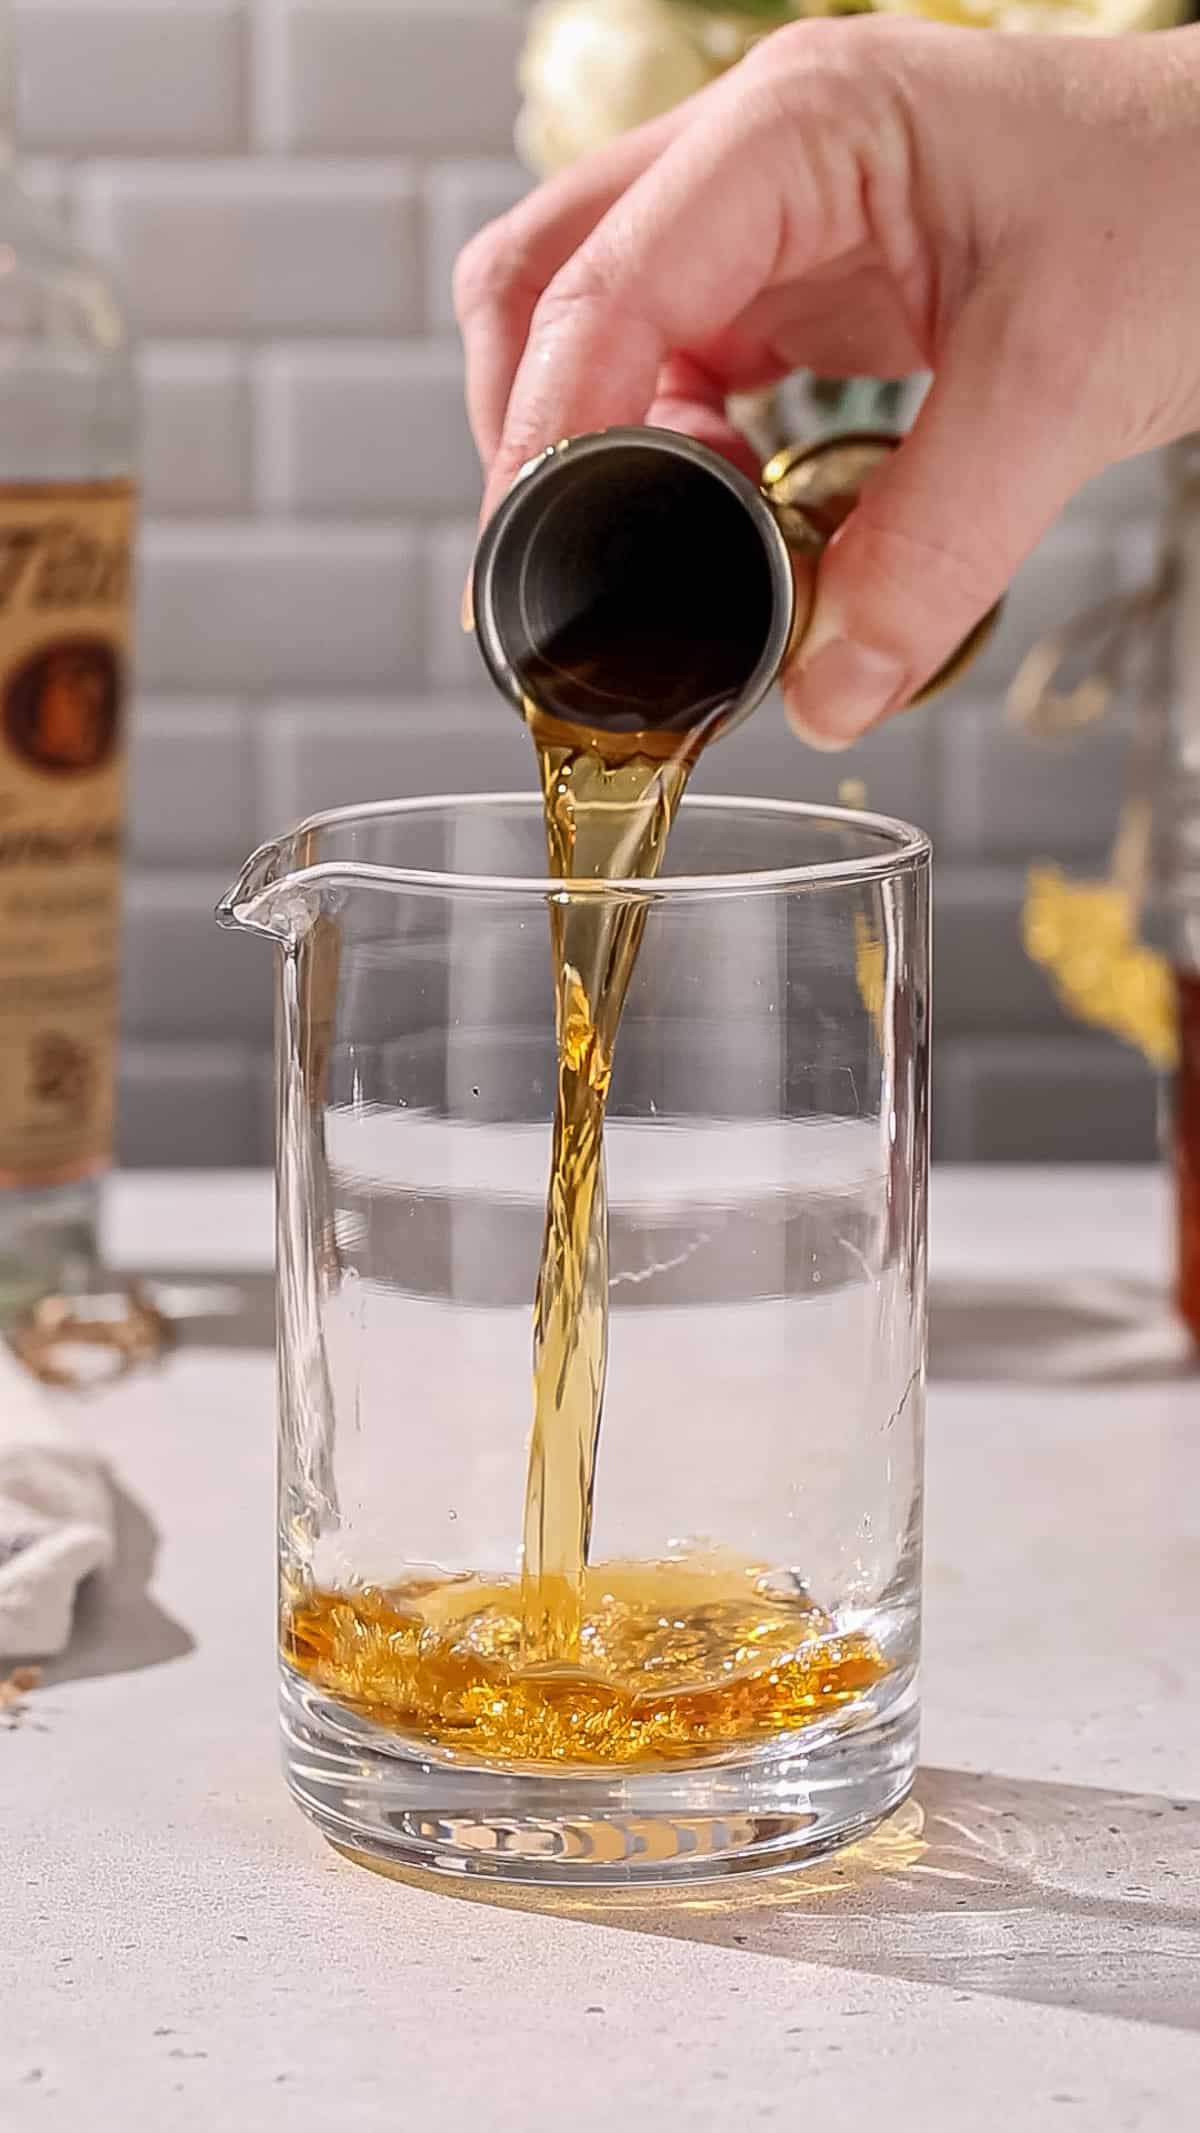 Hand pouring tea-infused vodka into a cocktail mixing glass.